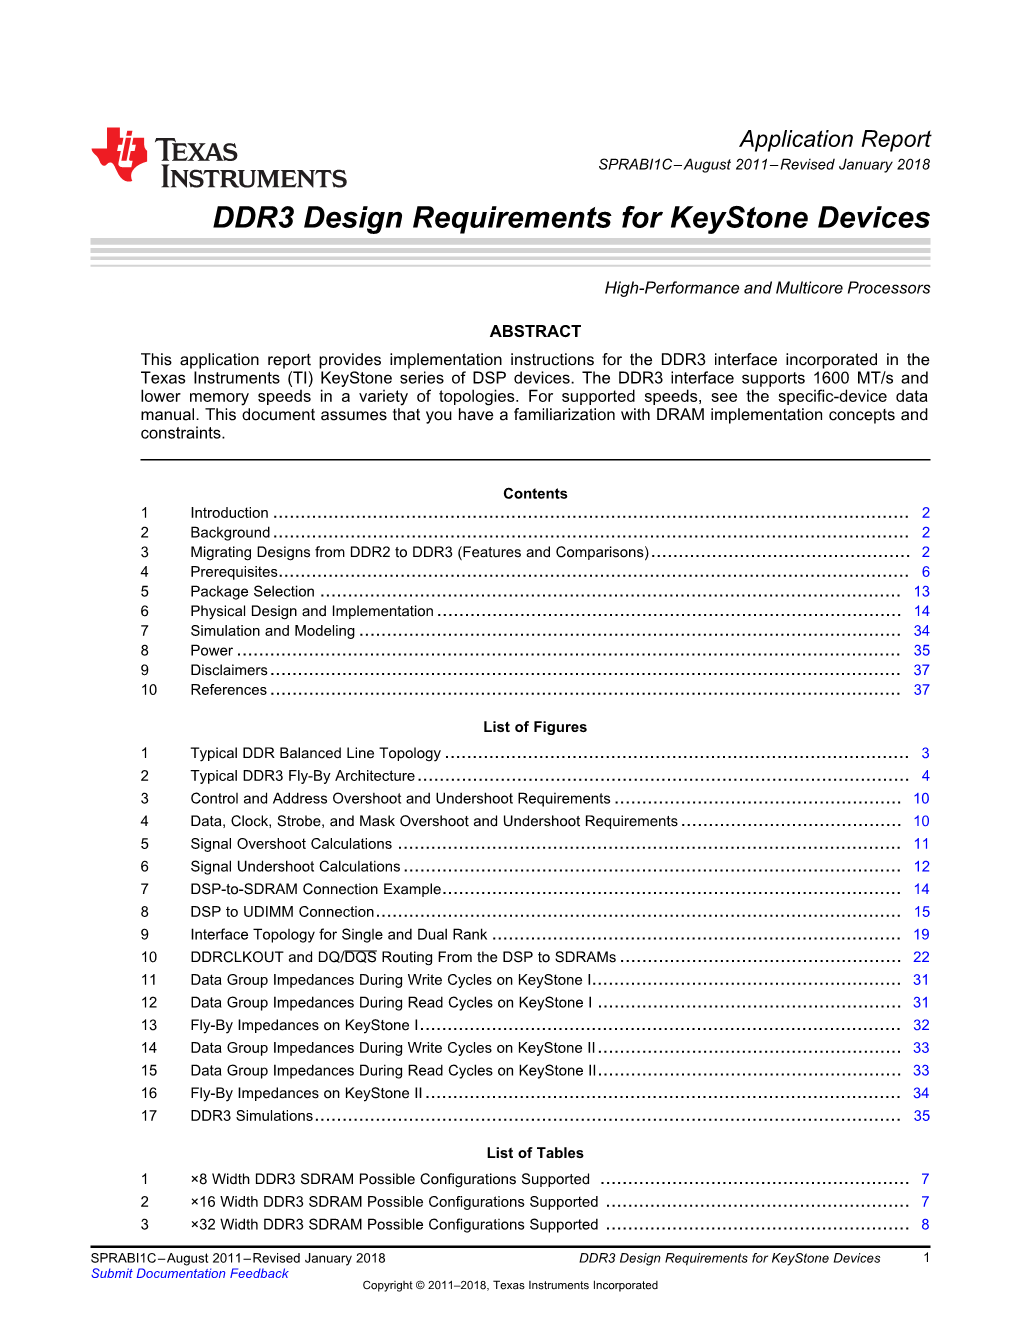 DDR3 Design Requirements for Keystone Devices